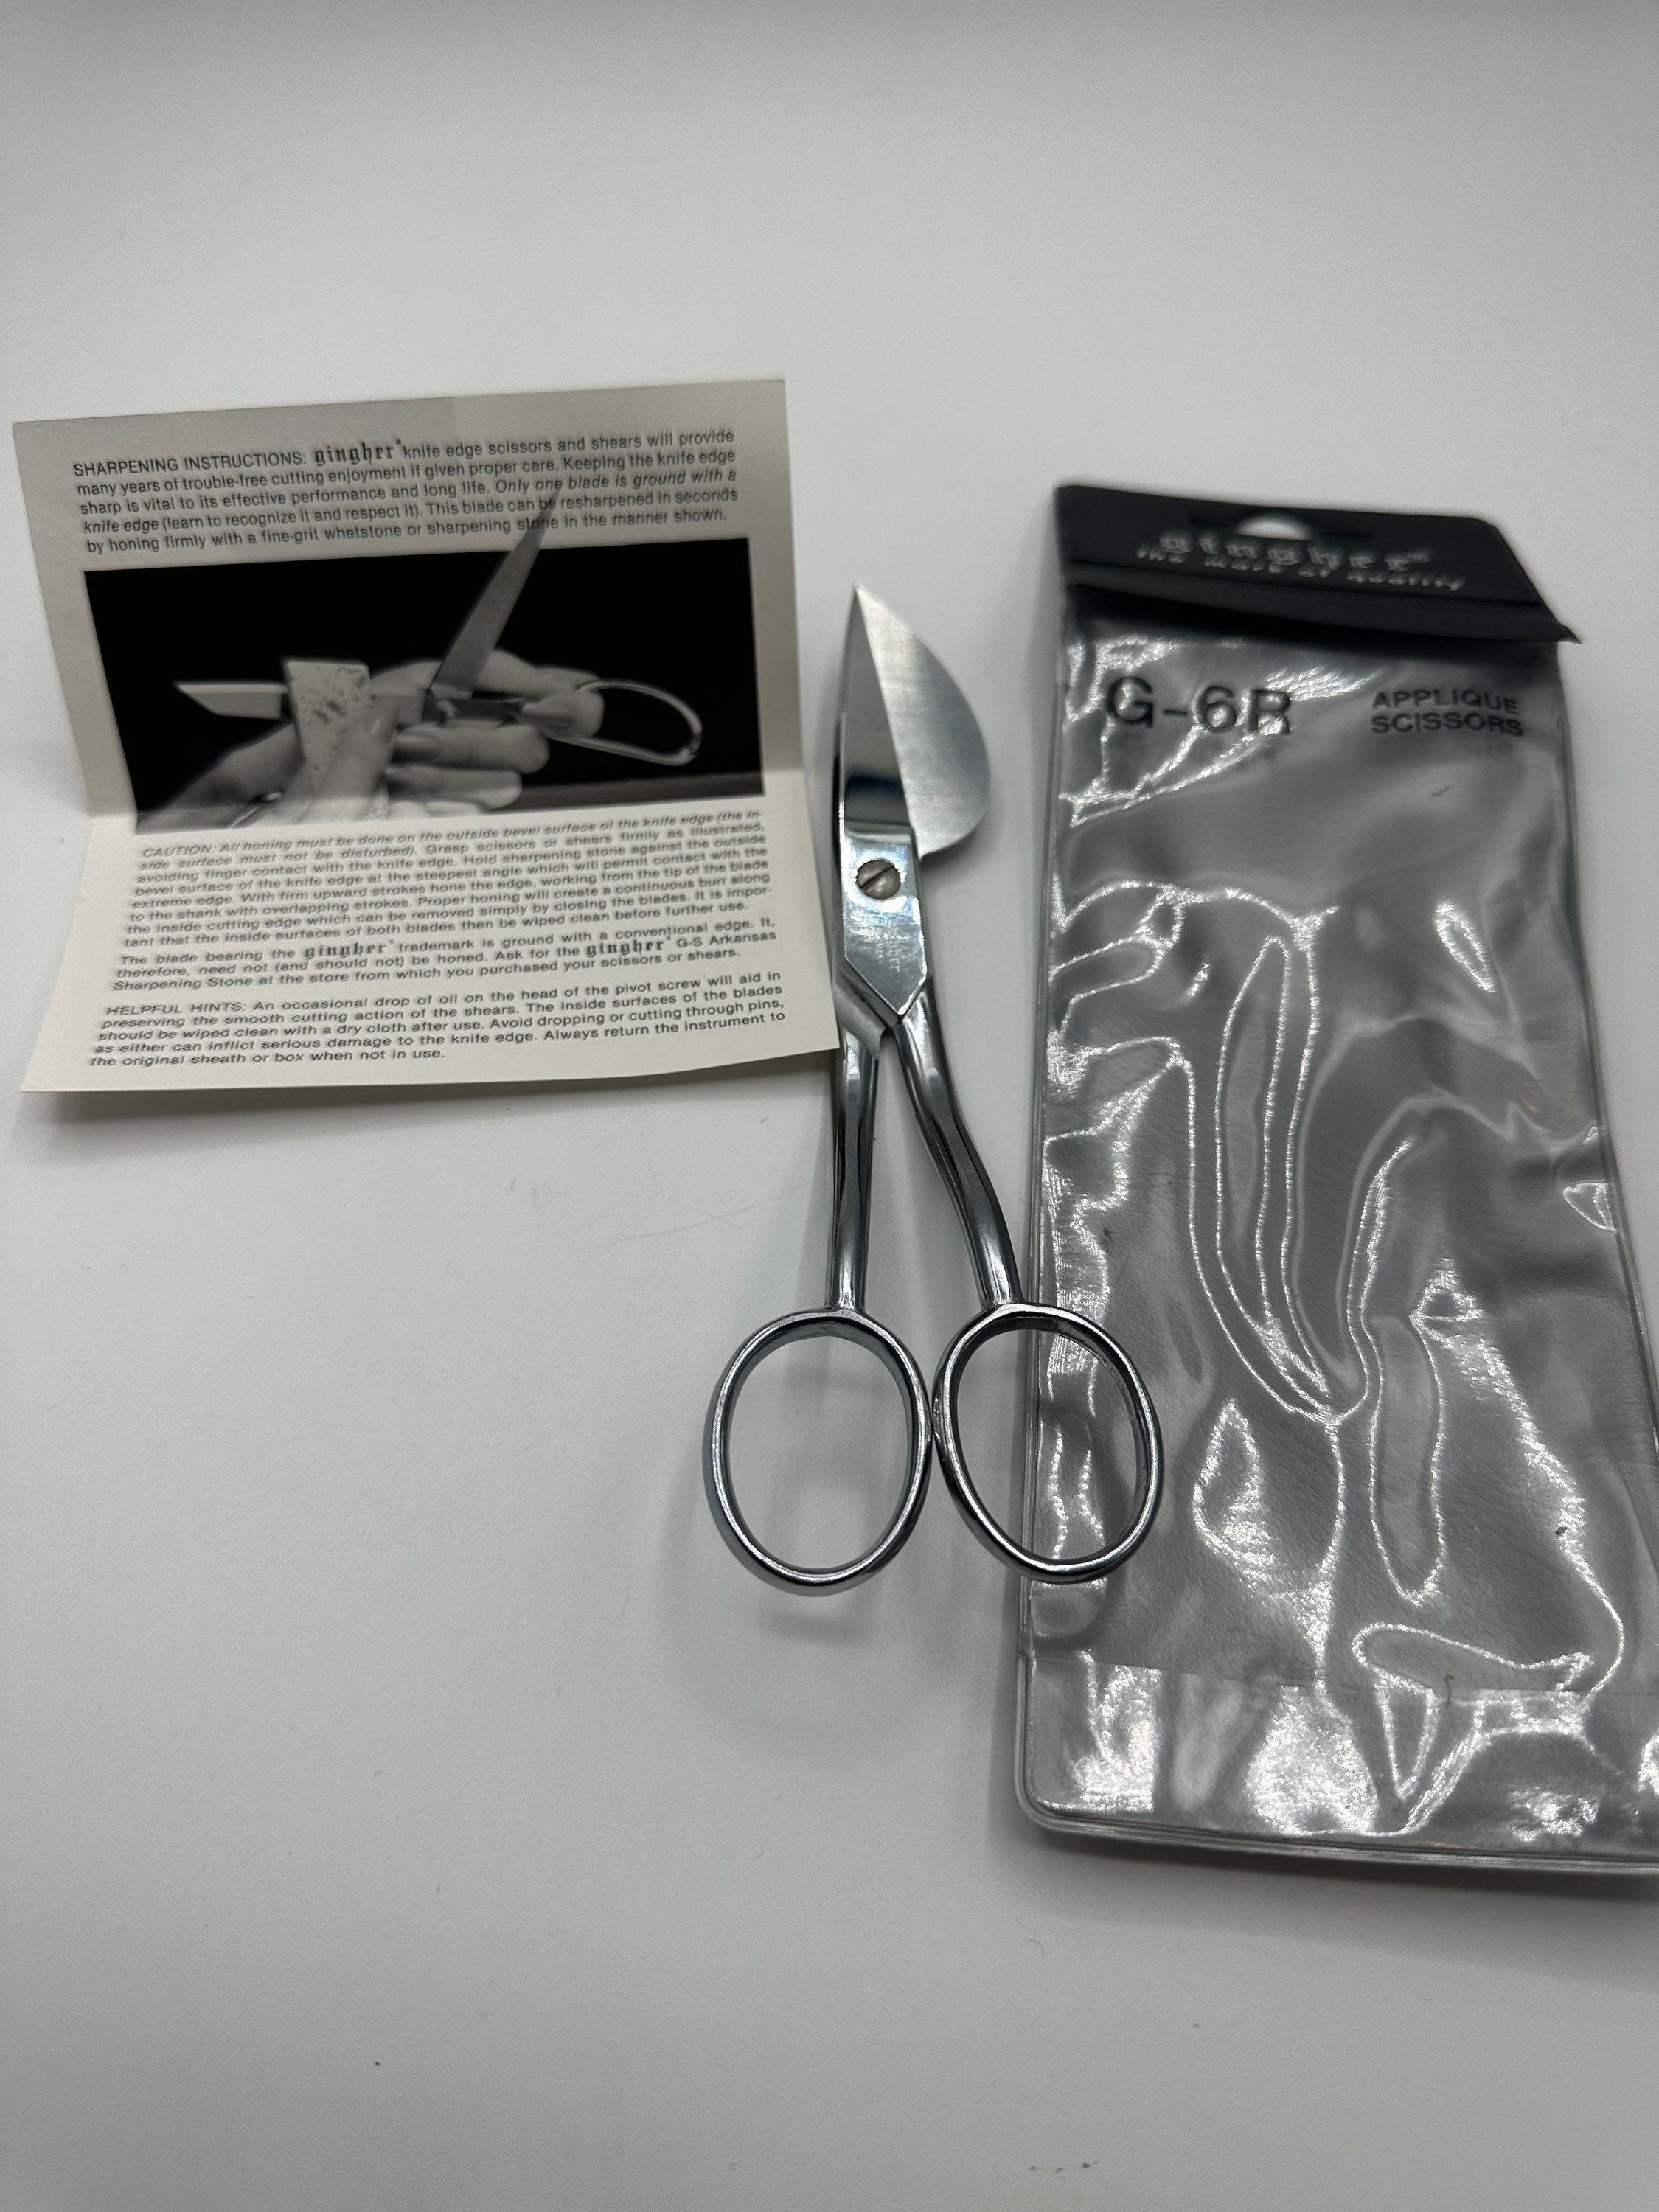 Vintage Gingher Sewing Scissors For Sale on Ruby Lane